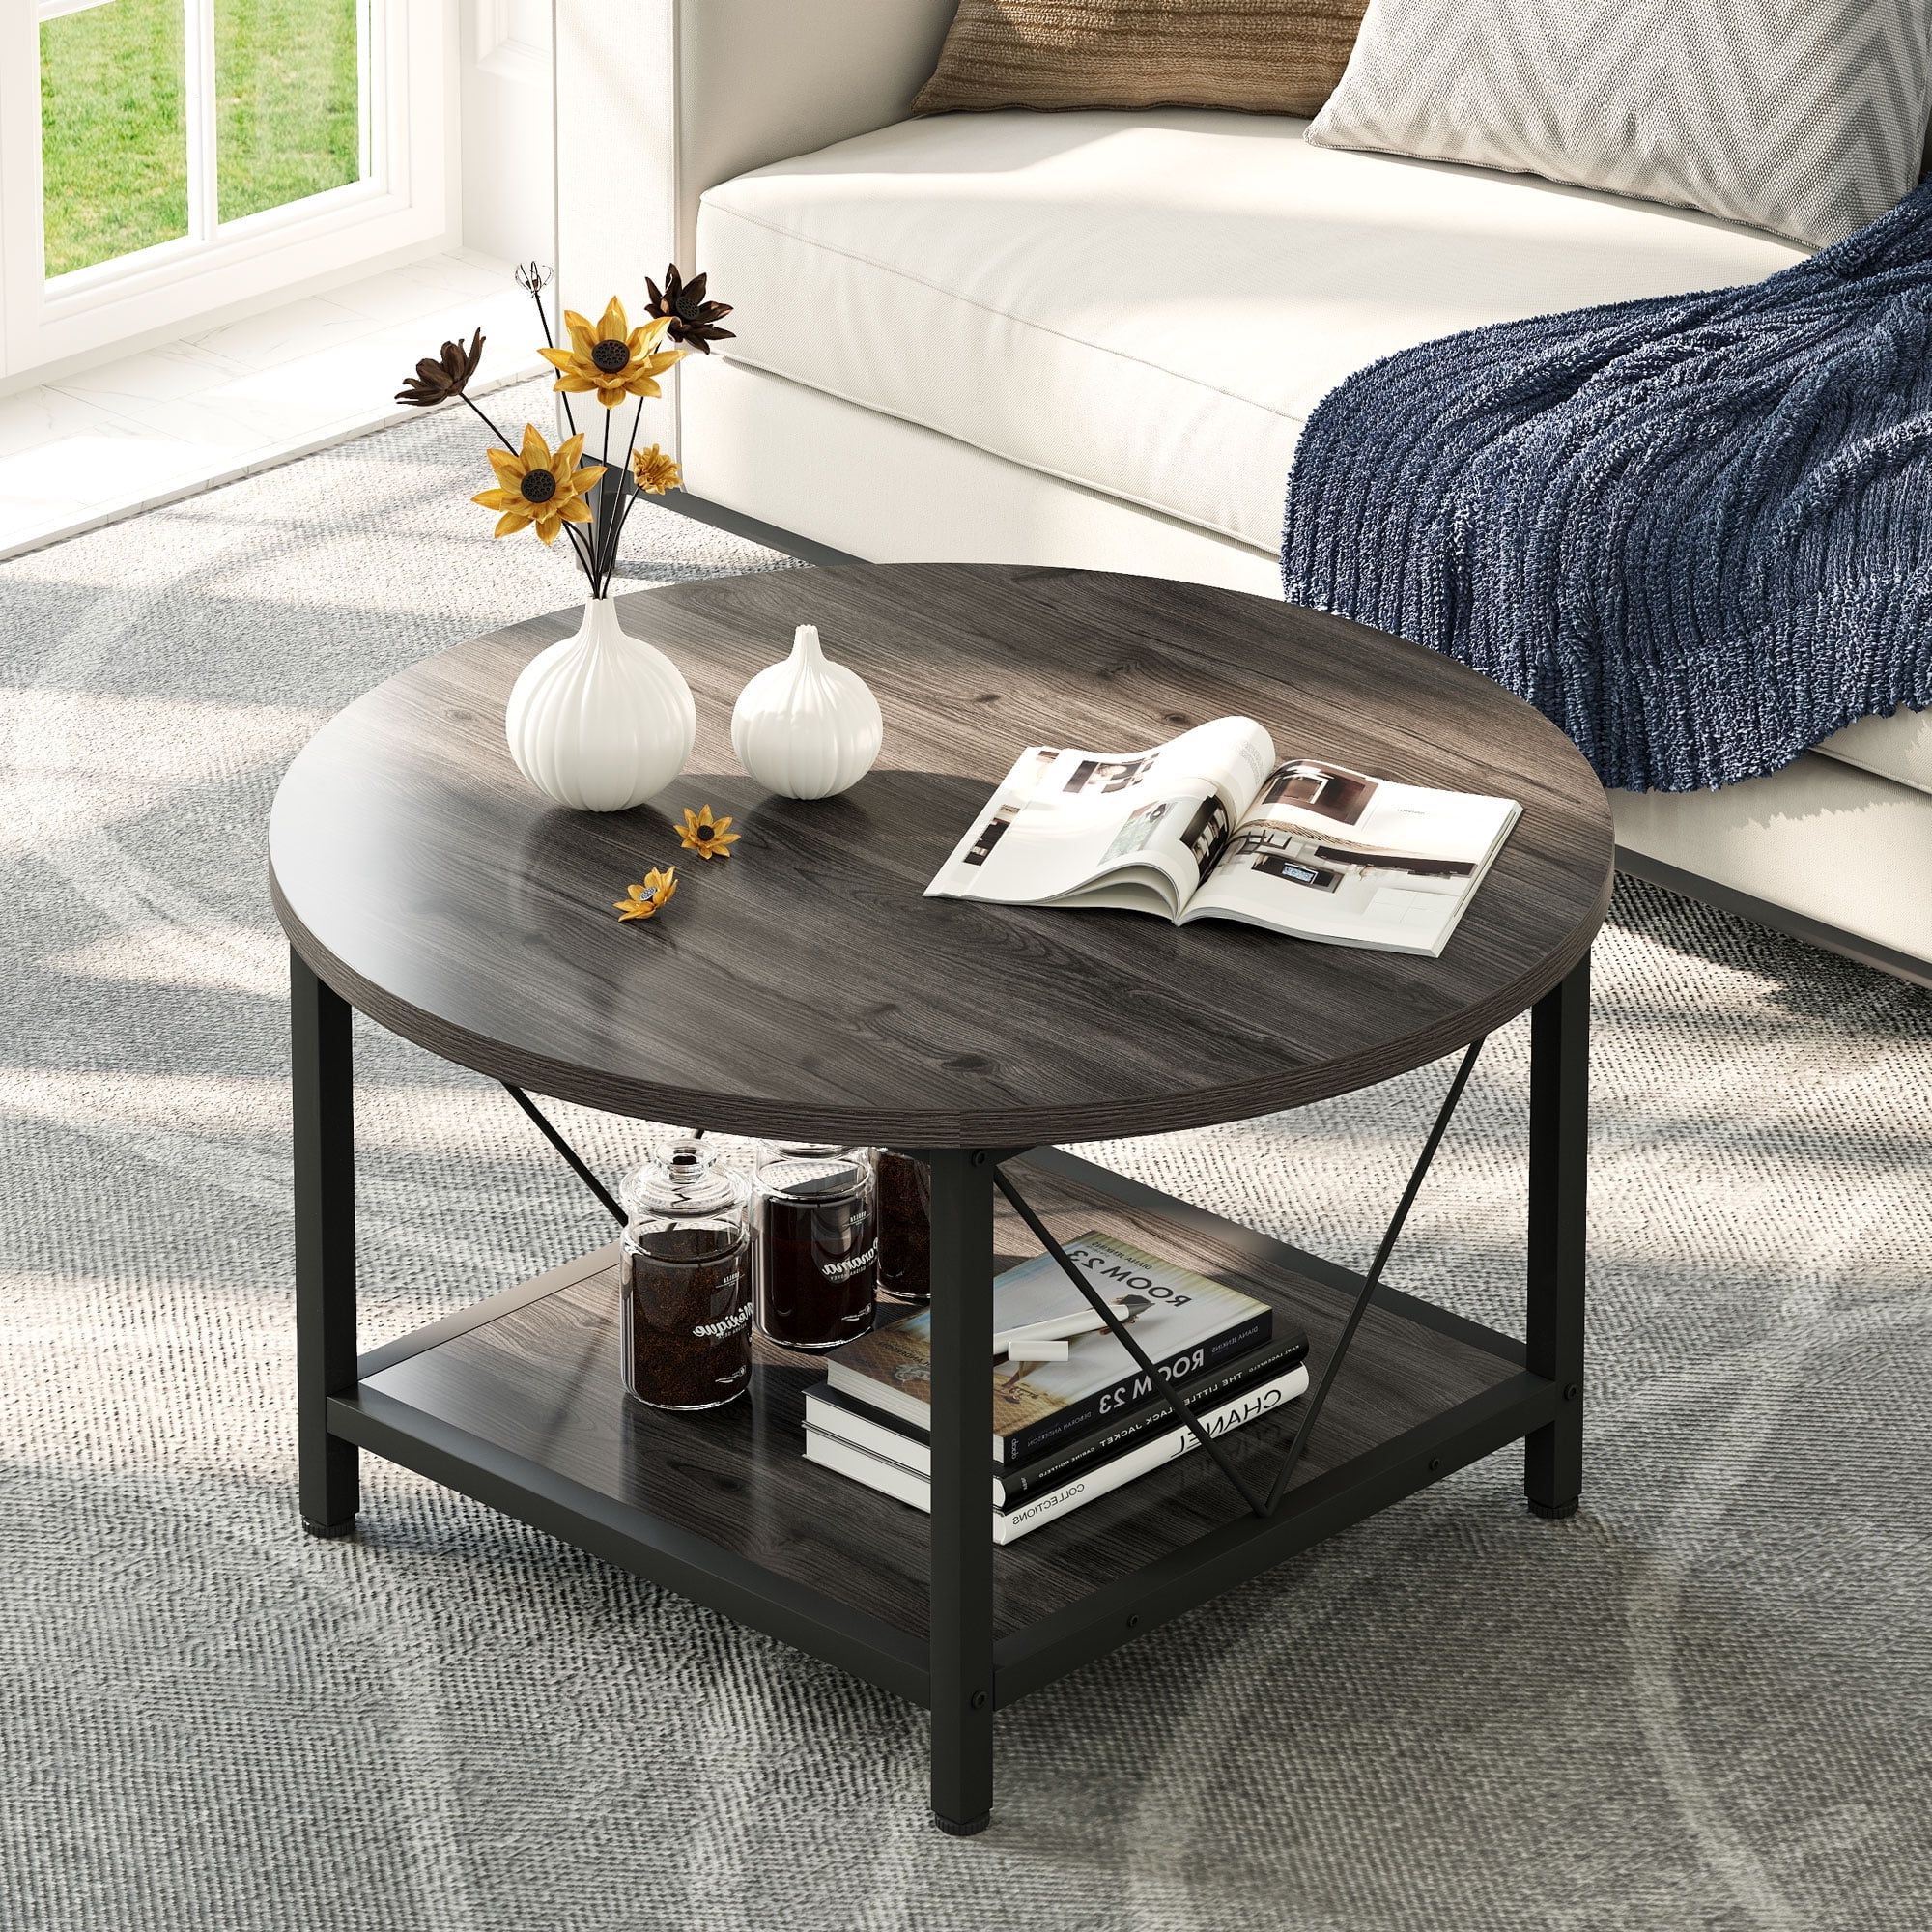 Fashionable Round Coffee Tables With Storage Pertaining To Dextrus Round Coffee Table With Storage, Rustic Living Room Tables With  Sturdy Metal Legs, Dark Gray – Walmart (Photo 4 of 10)